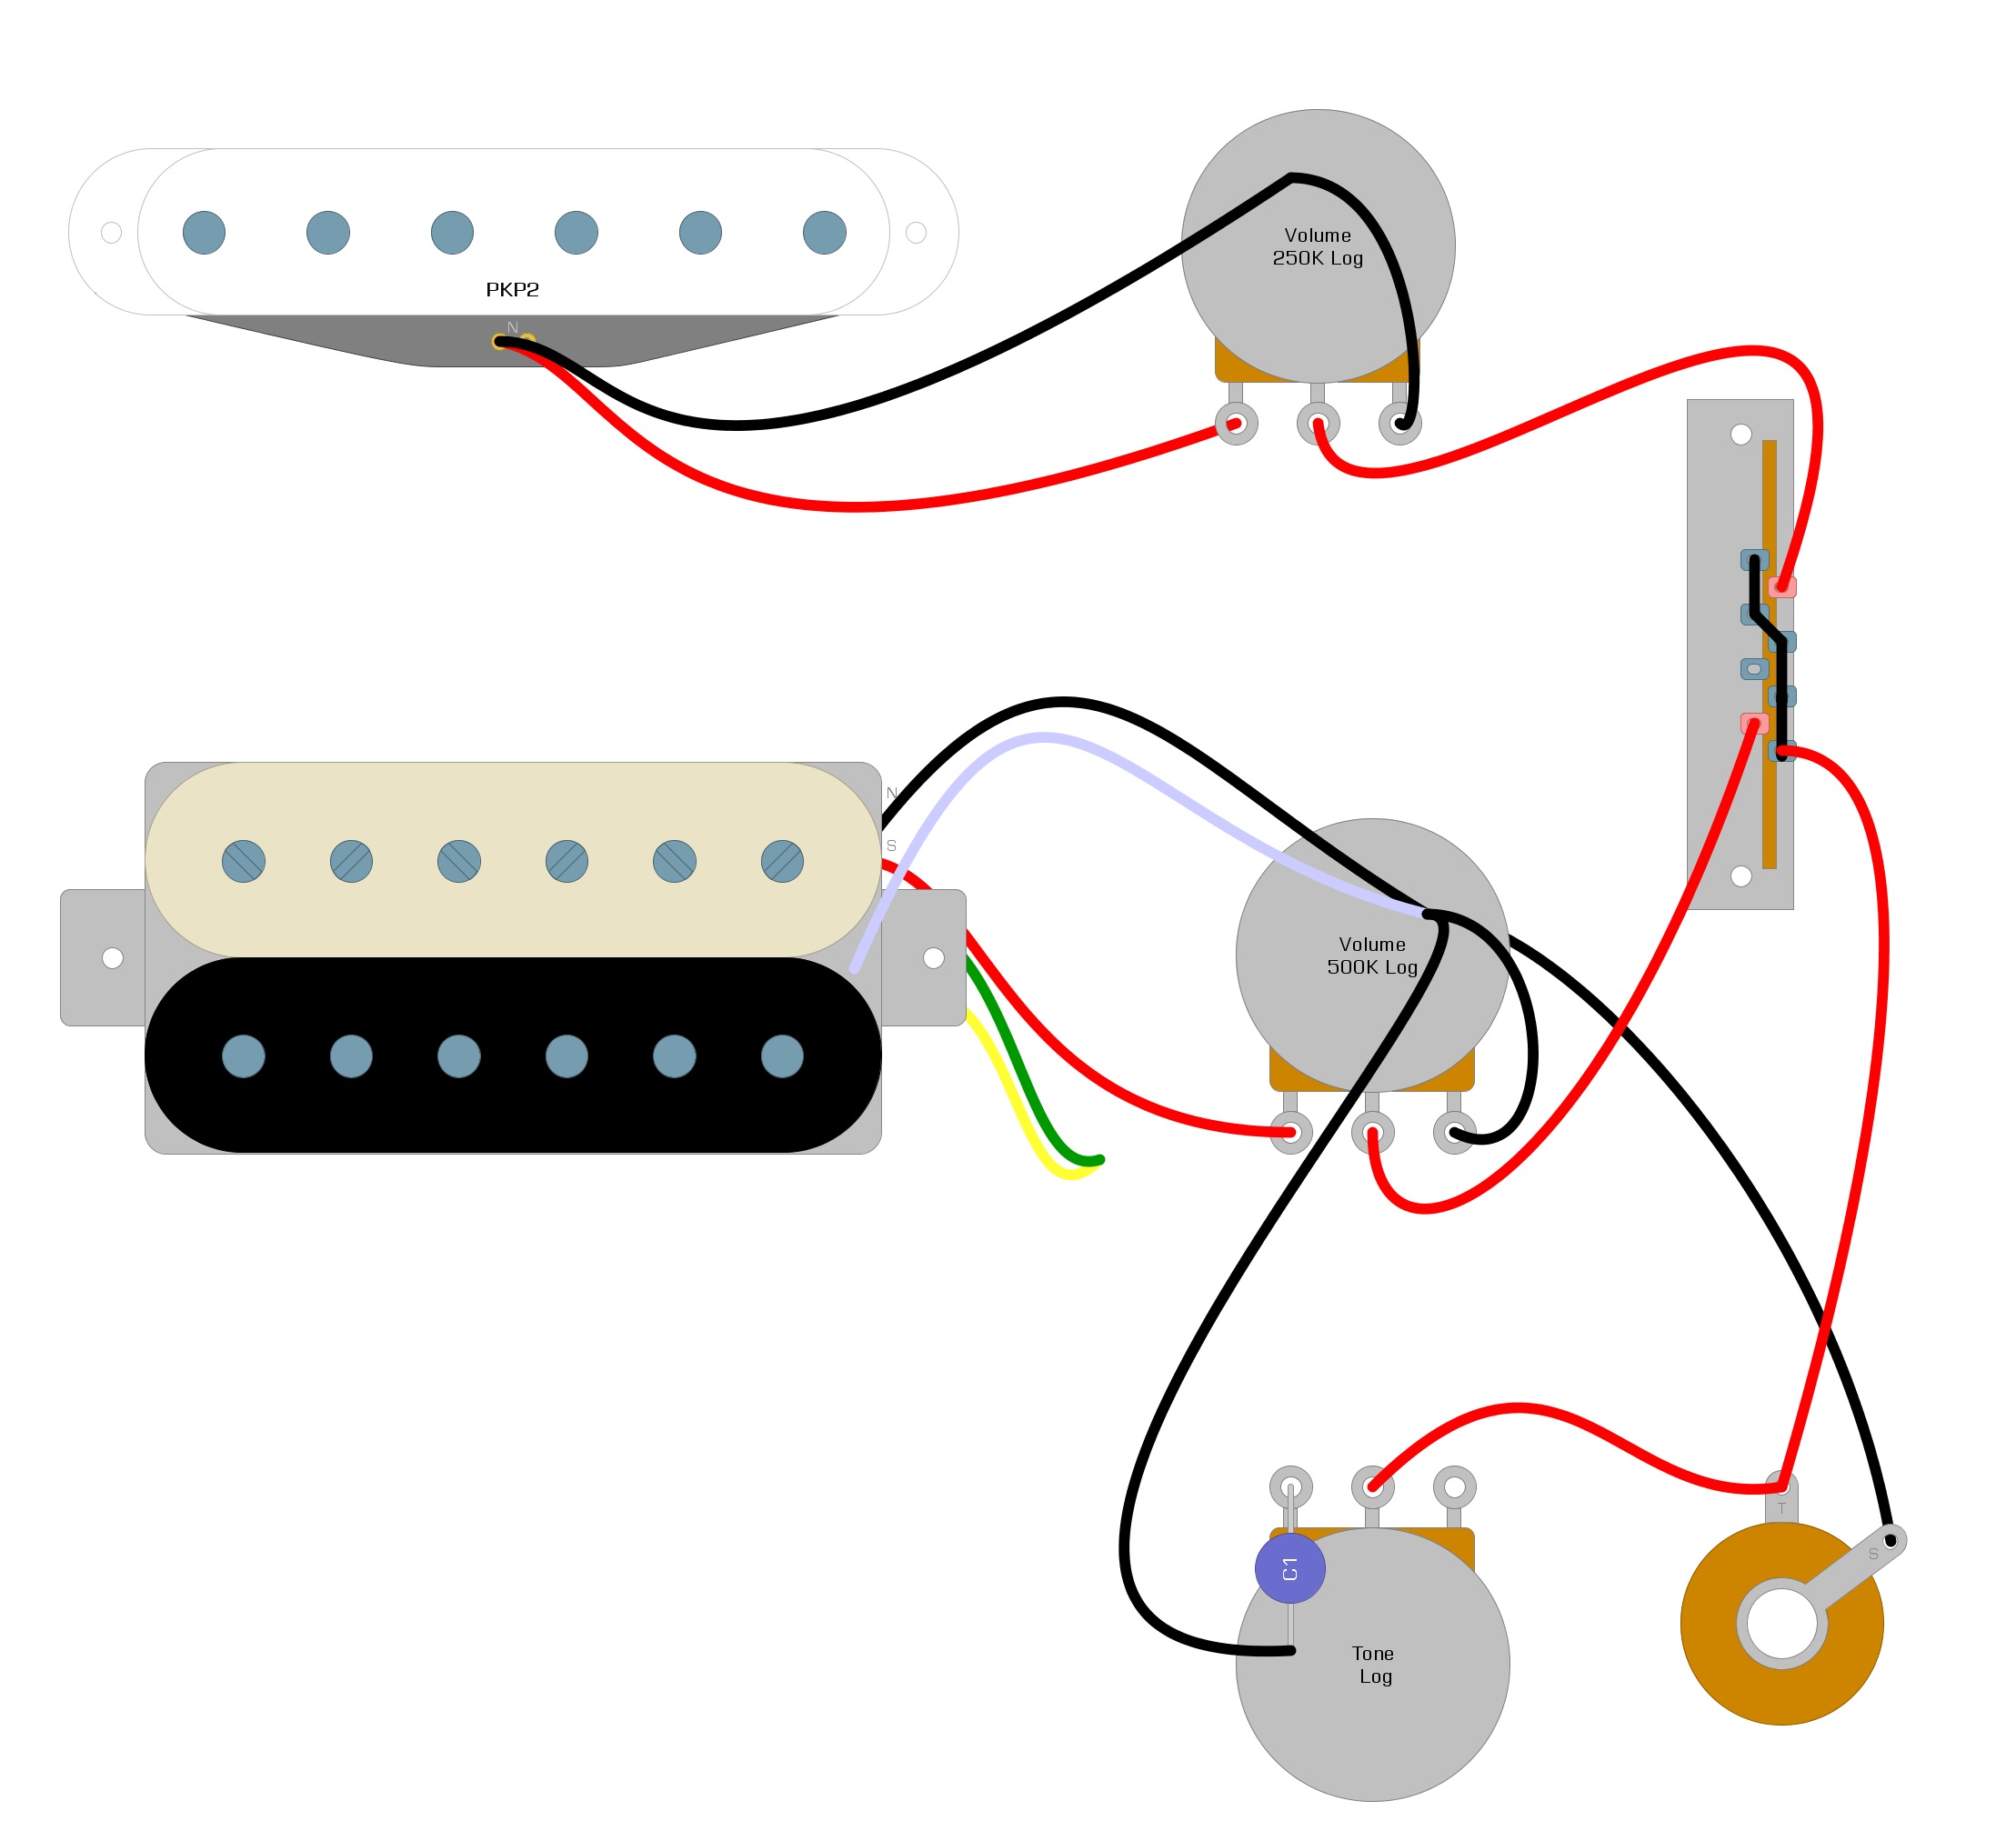 Wiring Diagram Telecaster One Humbucker One Single Coil from humbuckersoup.com